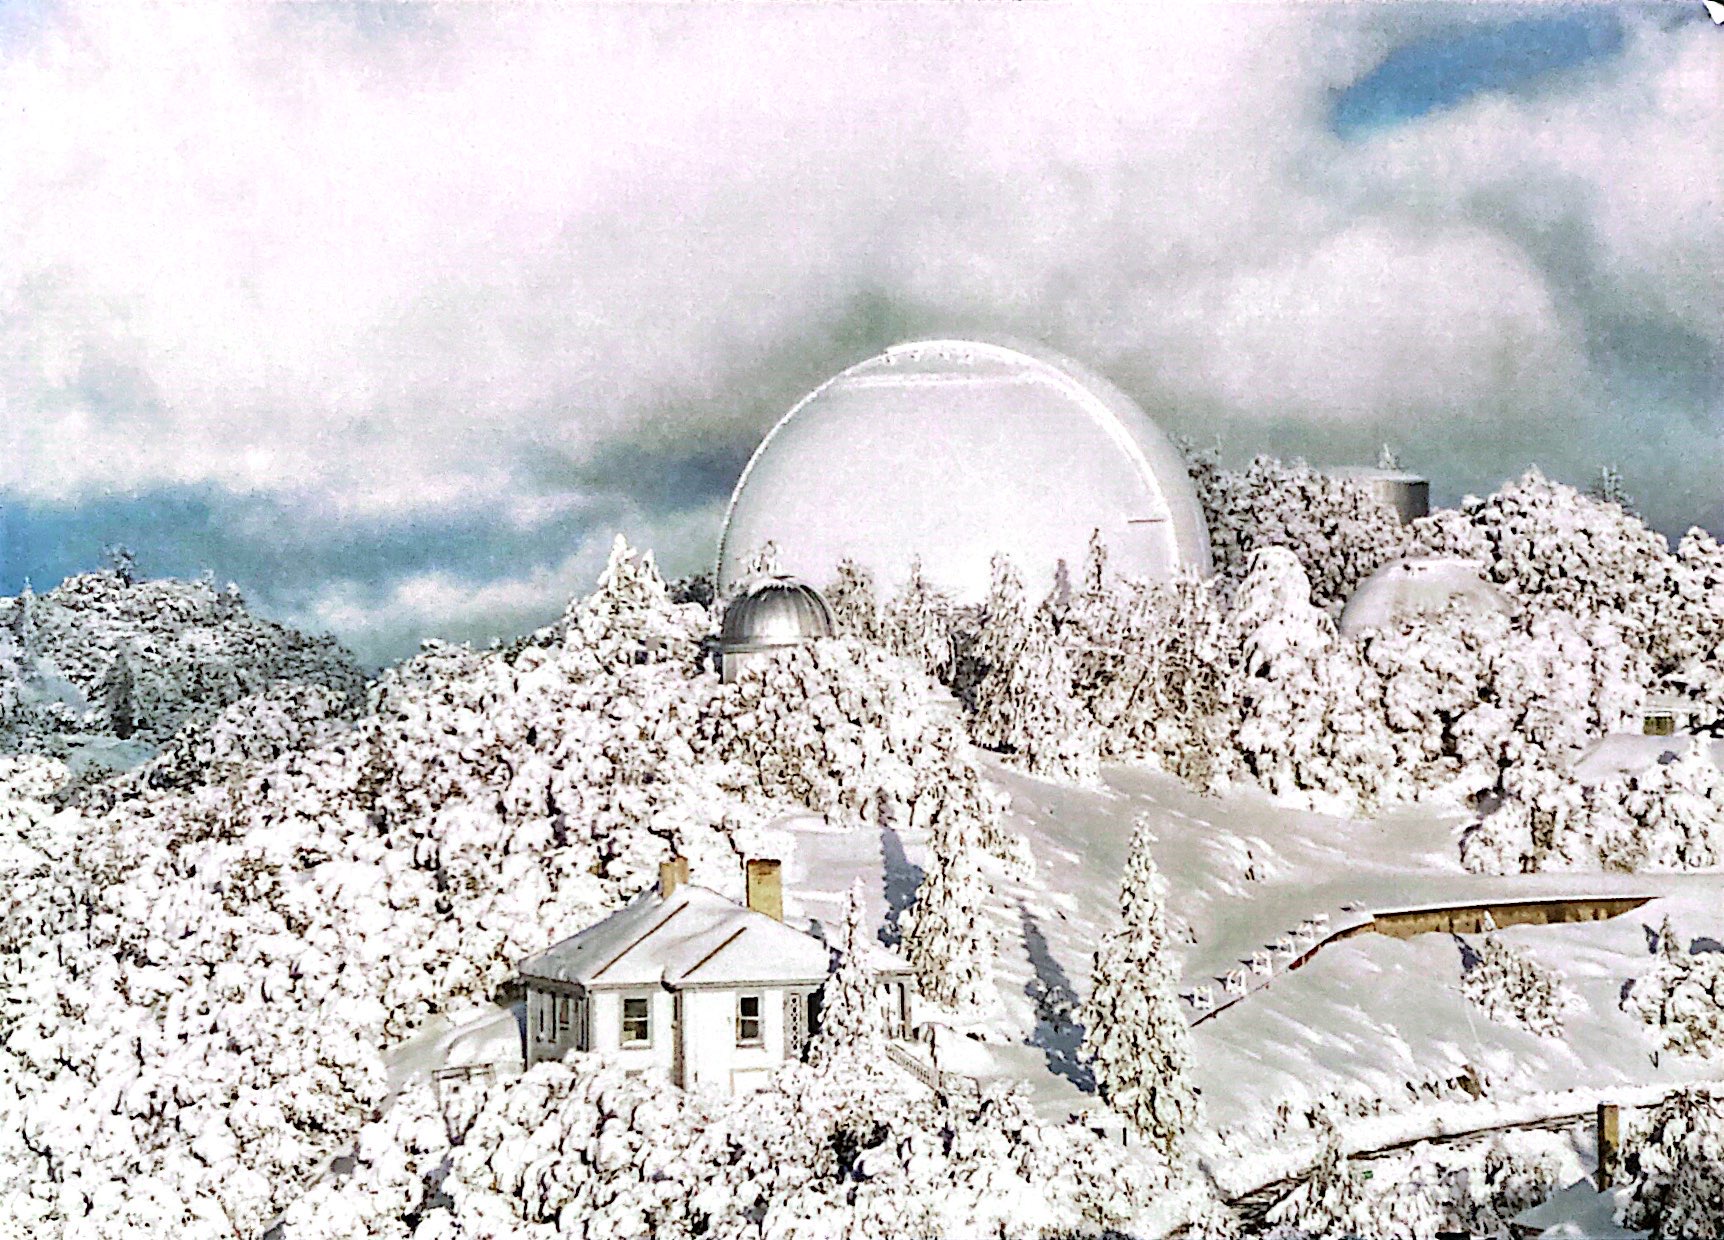 The Lick Observatory, Winter